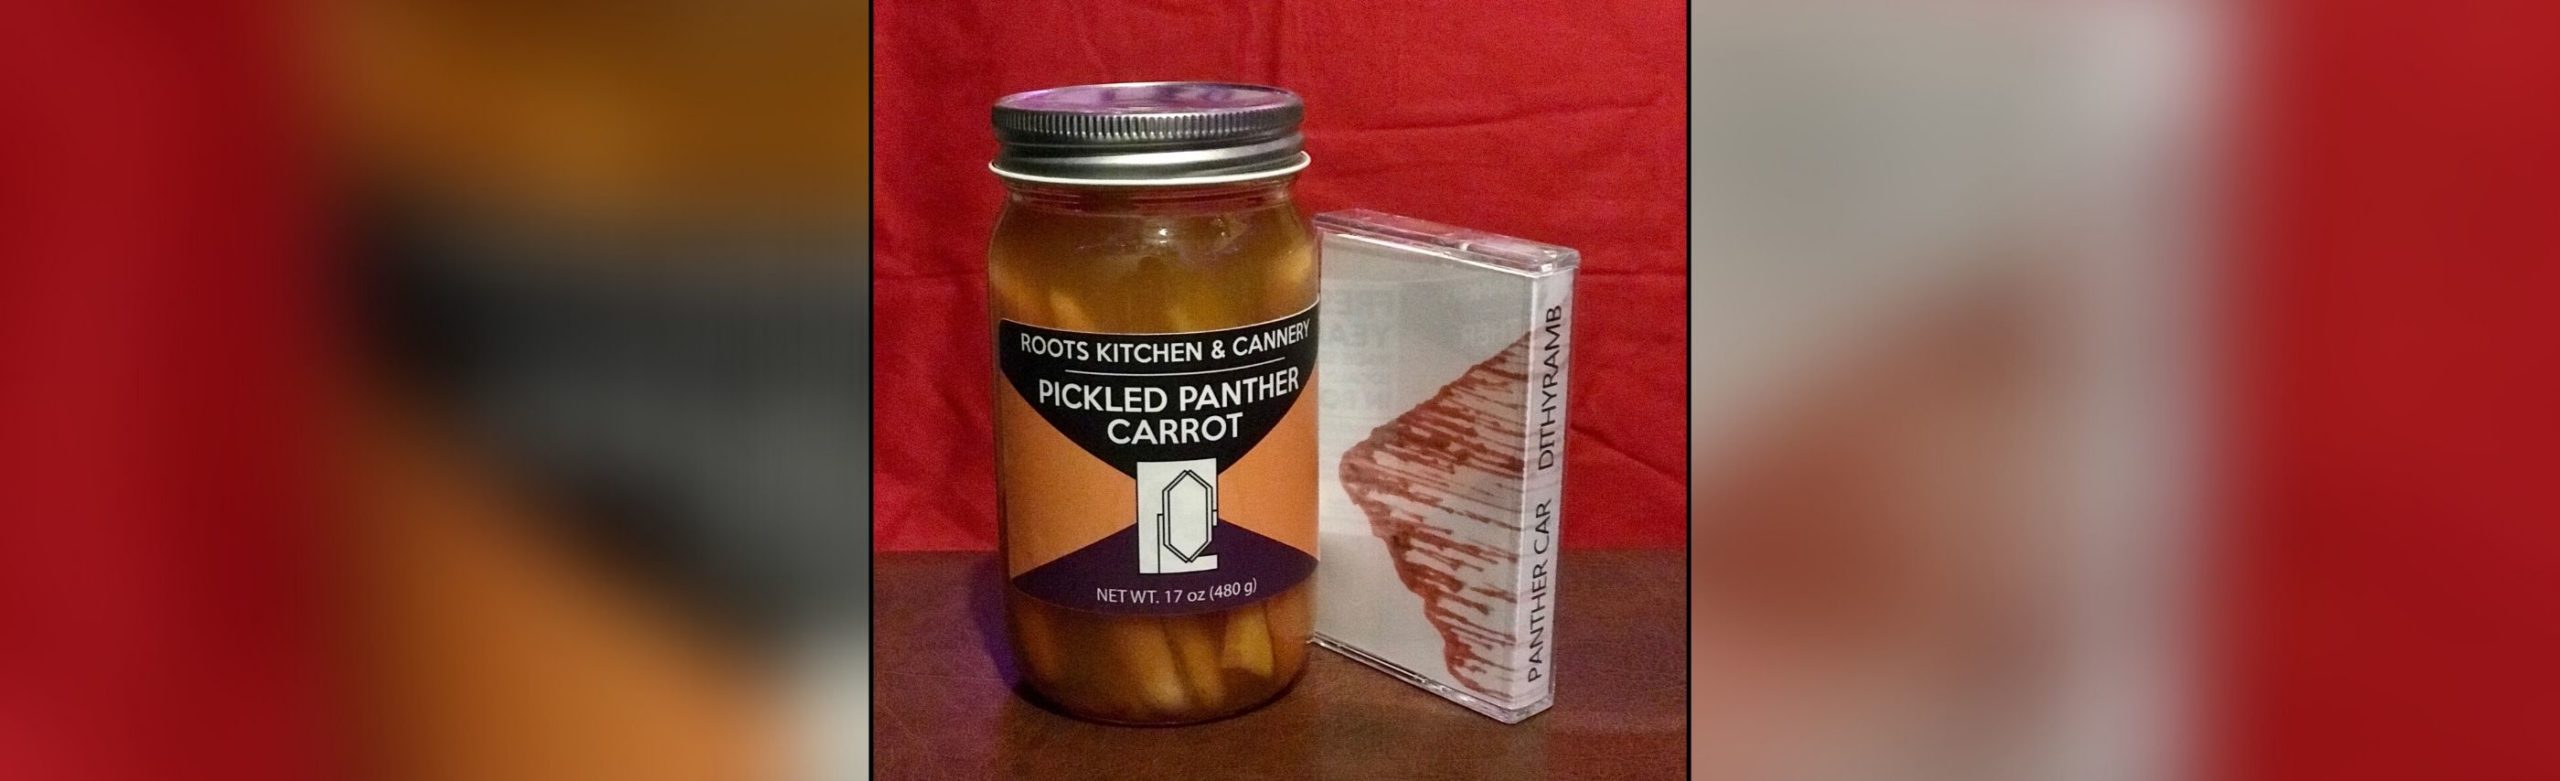 Panther Car Tickets, Pickled Carrots, &  Cassette Giveaway Image